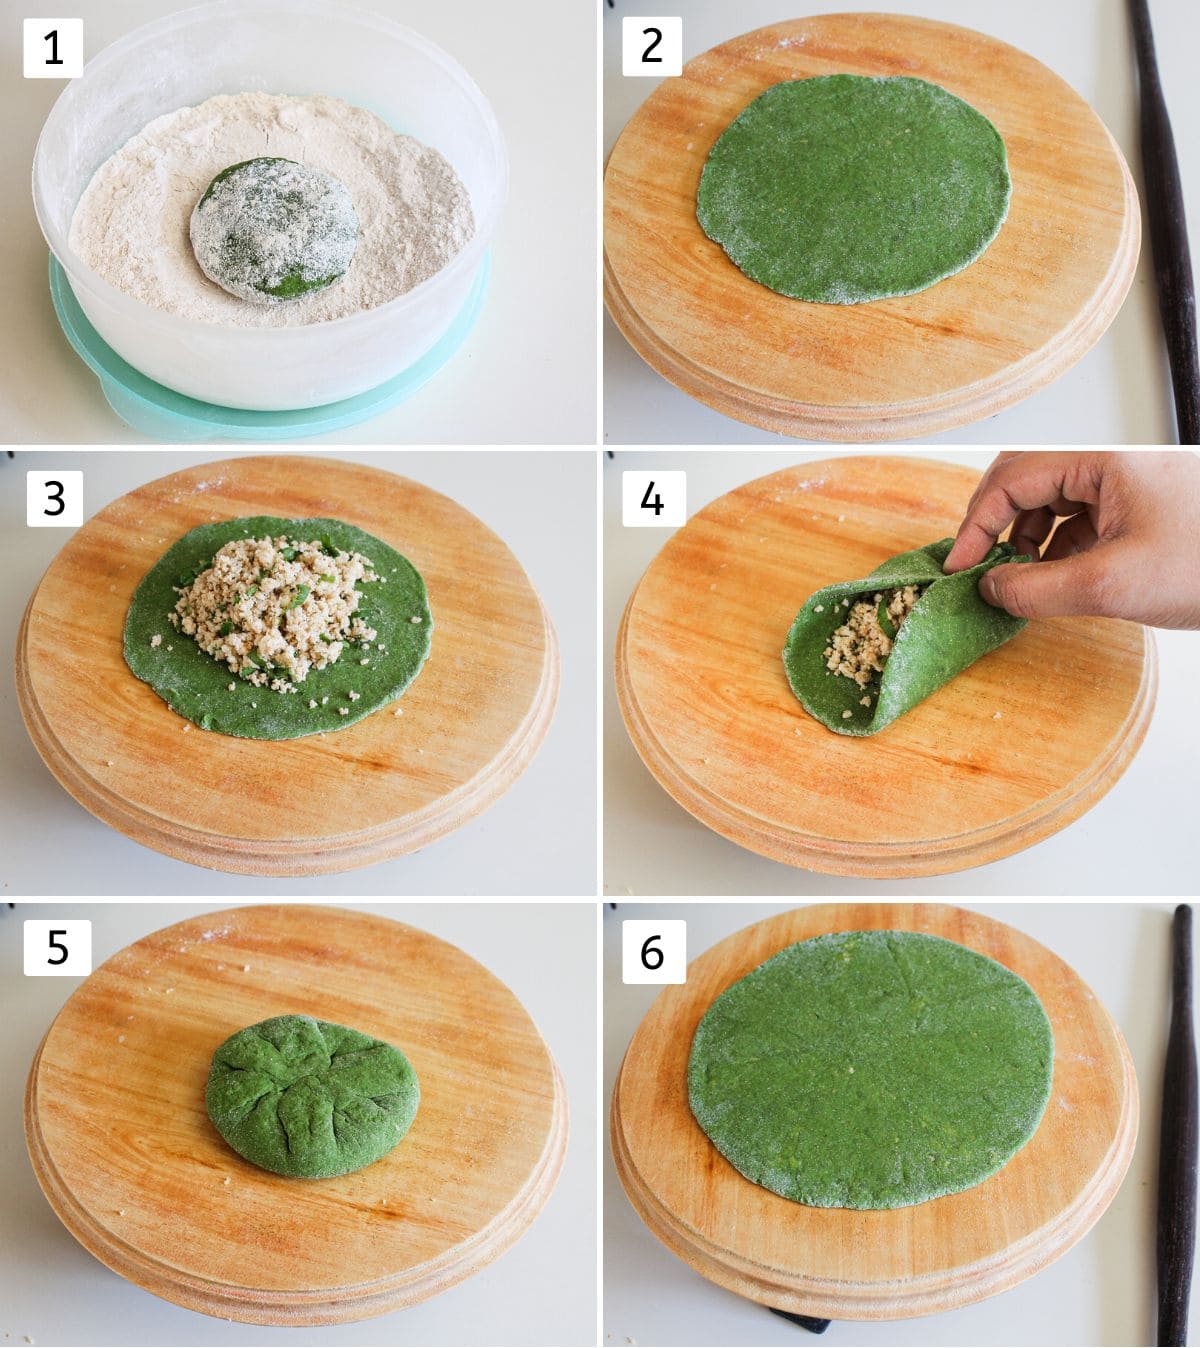 Collage of 6 images showing rolling, stuffing and rolling paratha.